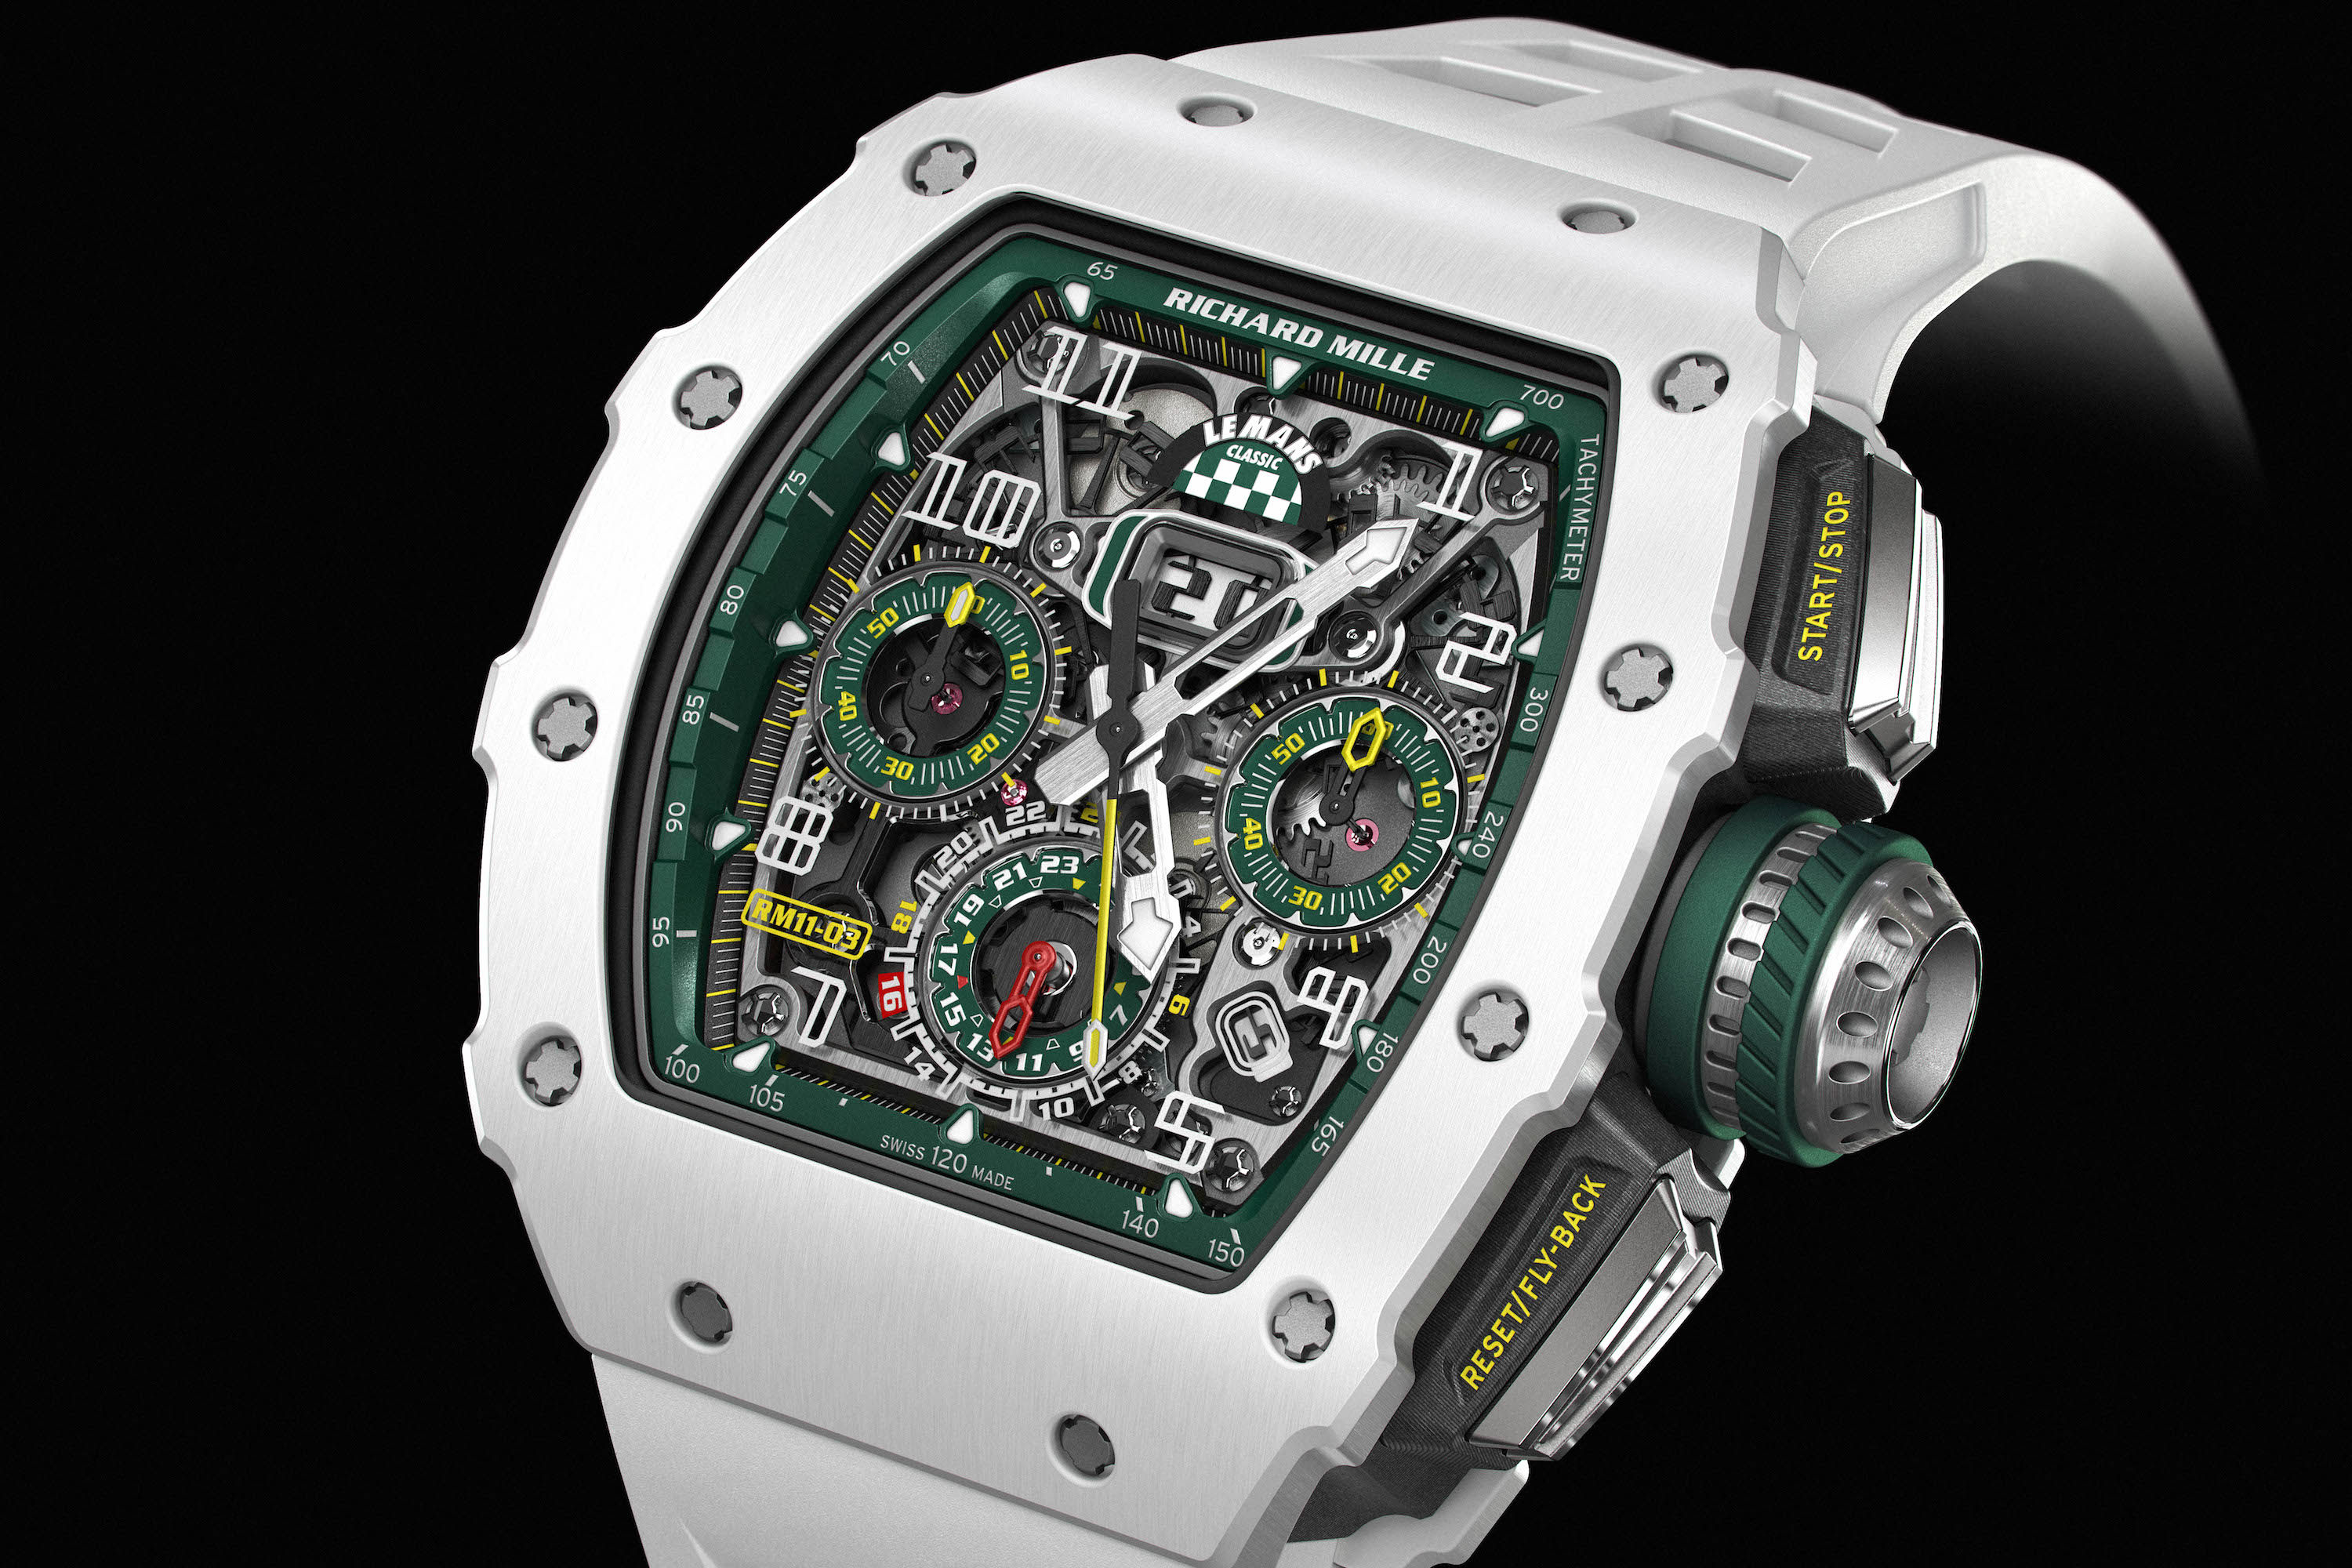 Richard Mille celebrates the spirit of Le Mans with the RM 11-03 LMC